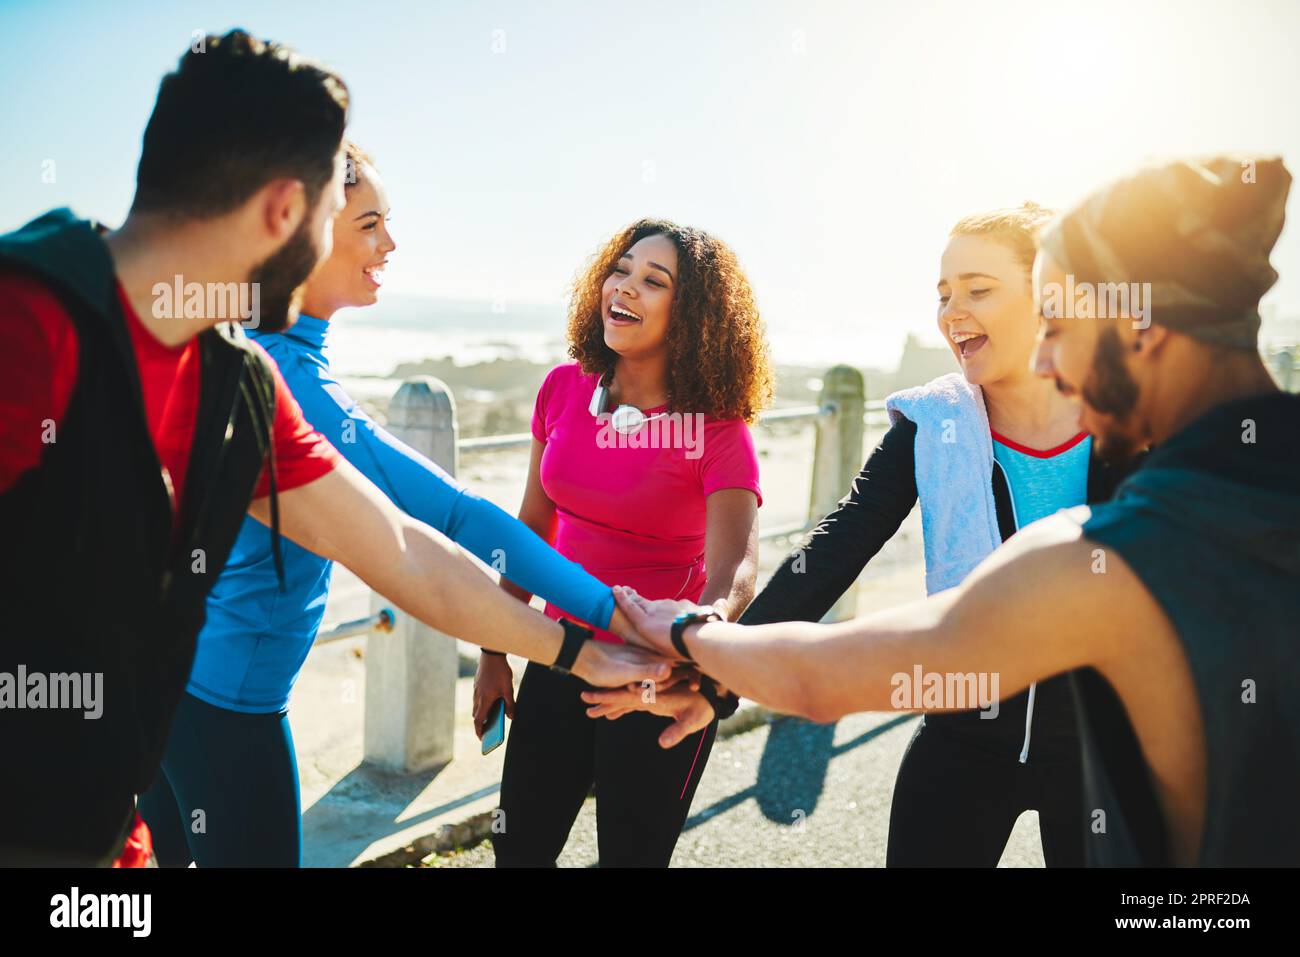 Who will be first today. a group of young cheerful friends forming a huddle before a fitness exercise outside during the day. Stock Photo